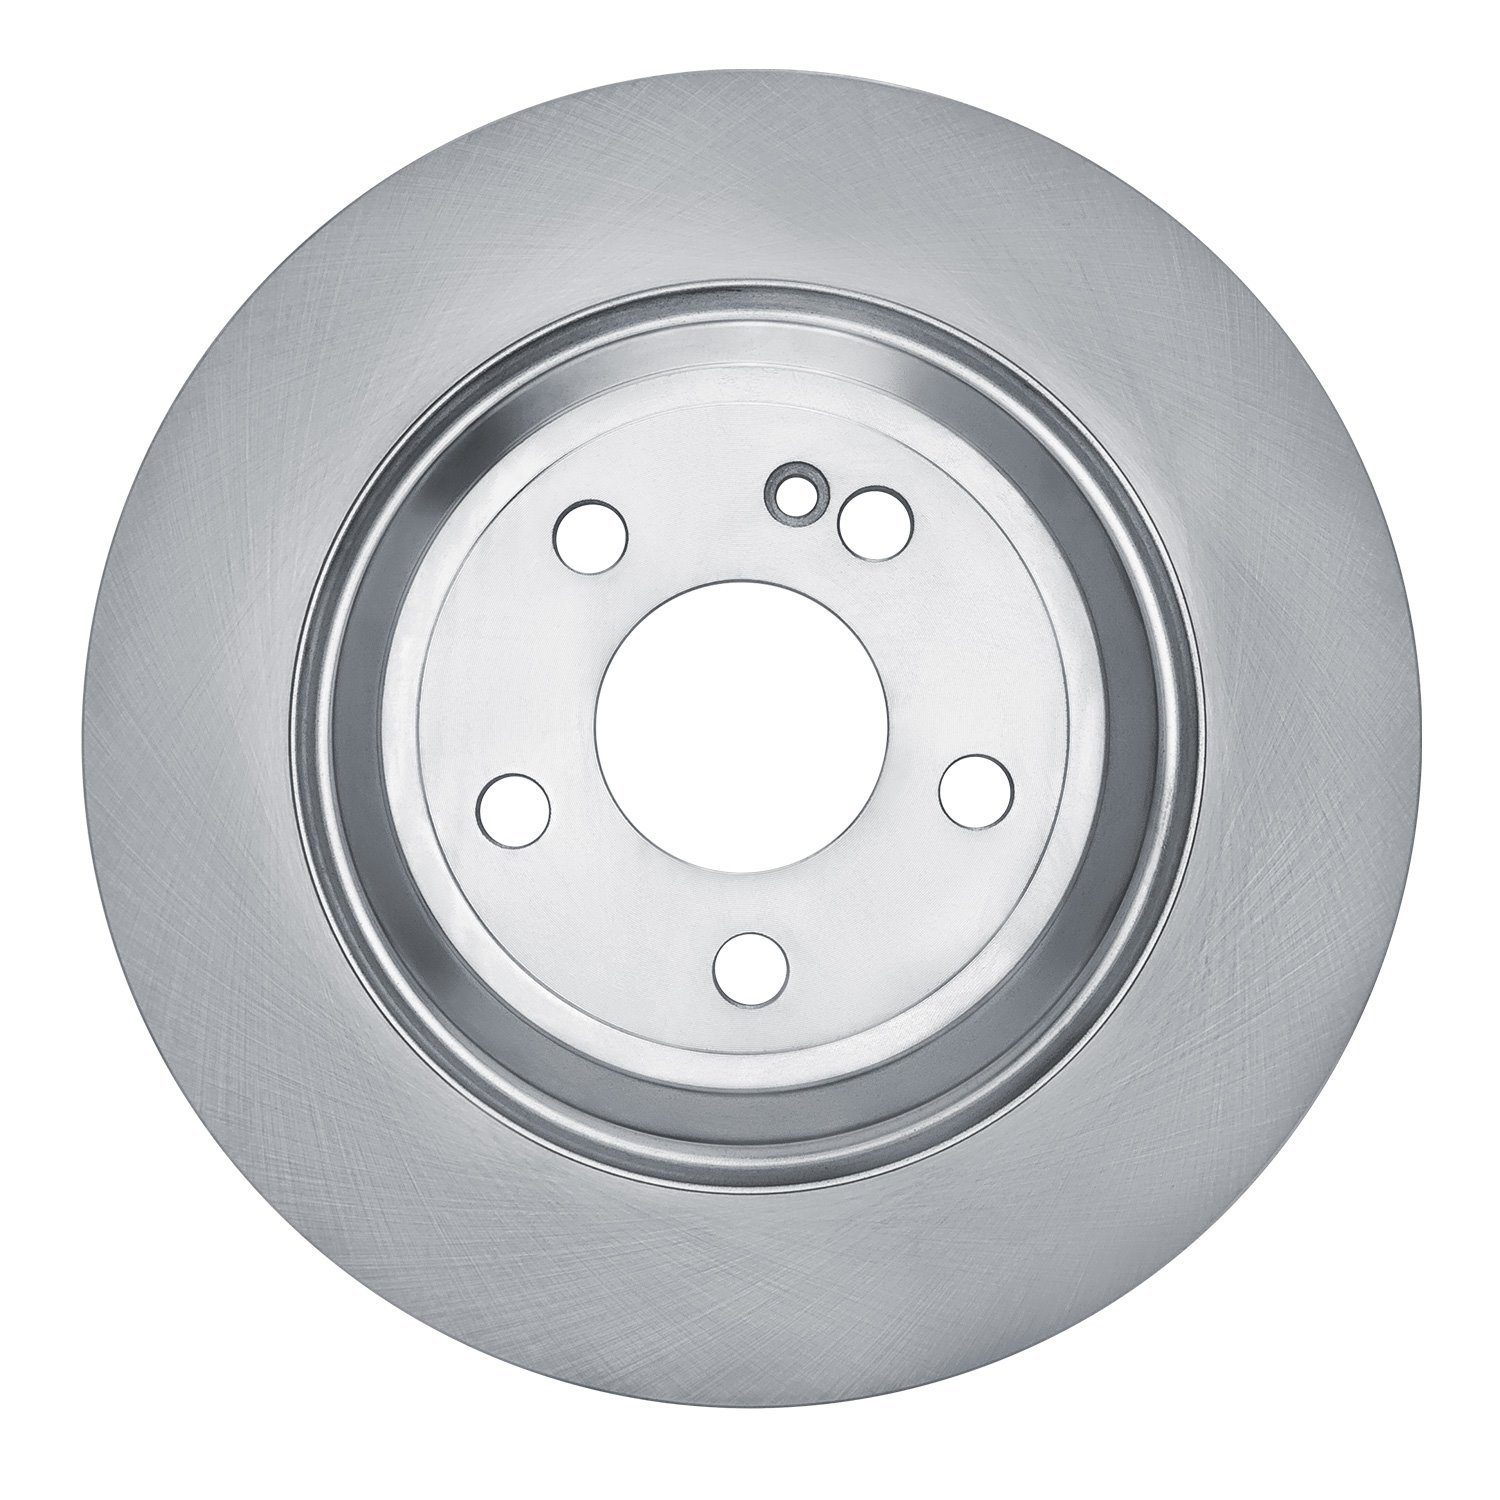 E-Line Blank Brake Rotor, Fits Select Mercedes-Benz, Position: Rear